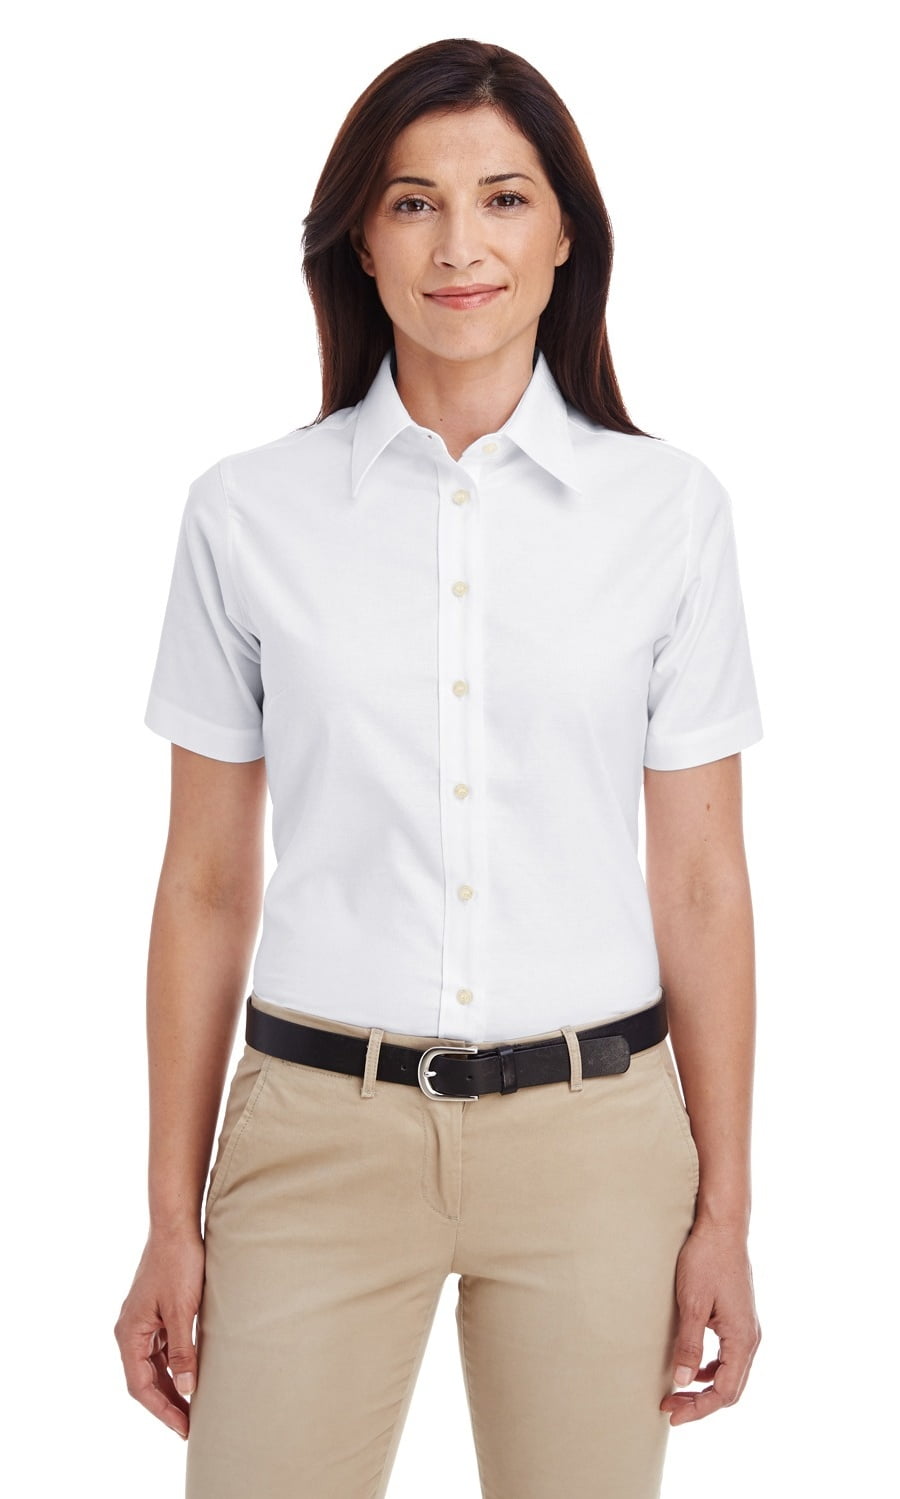 The Harriton Ladies Short Sleeve Oxford Shirt with Stain-Release ...